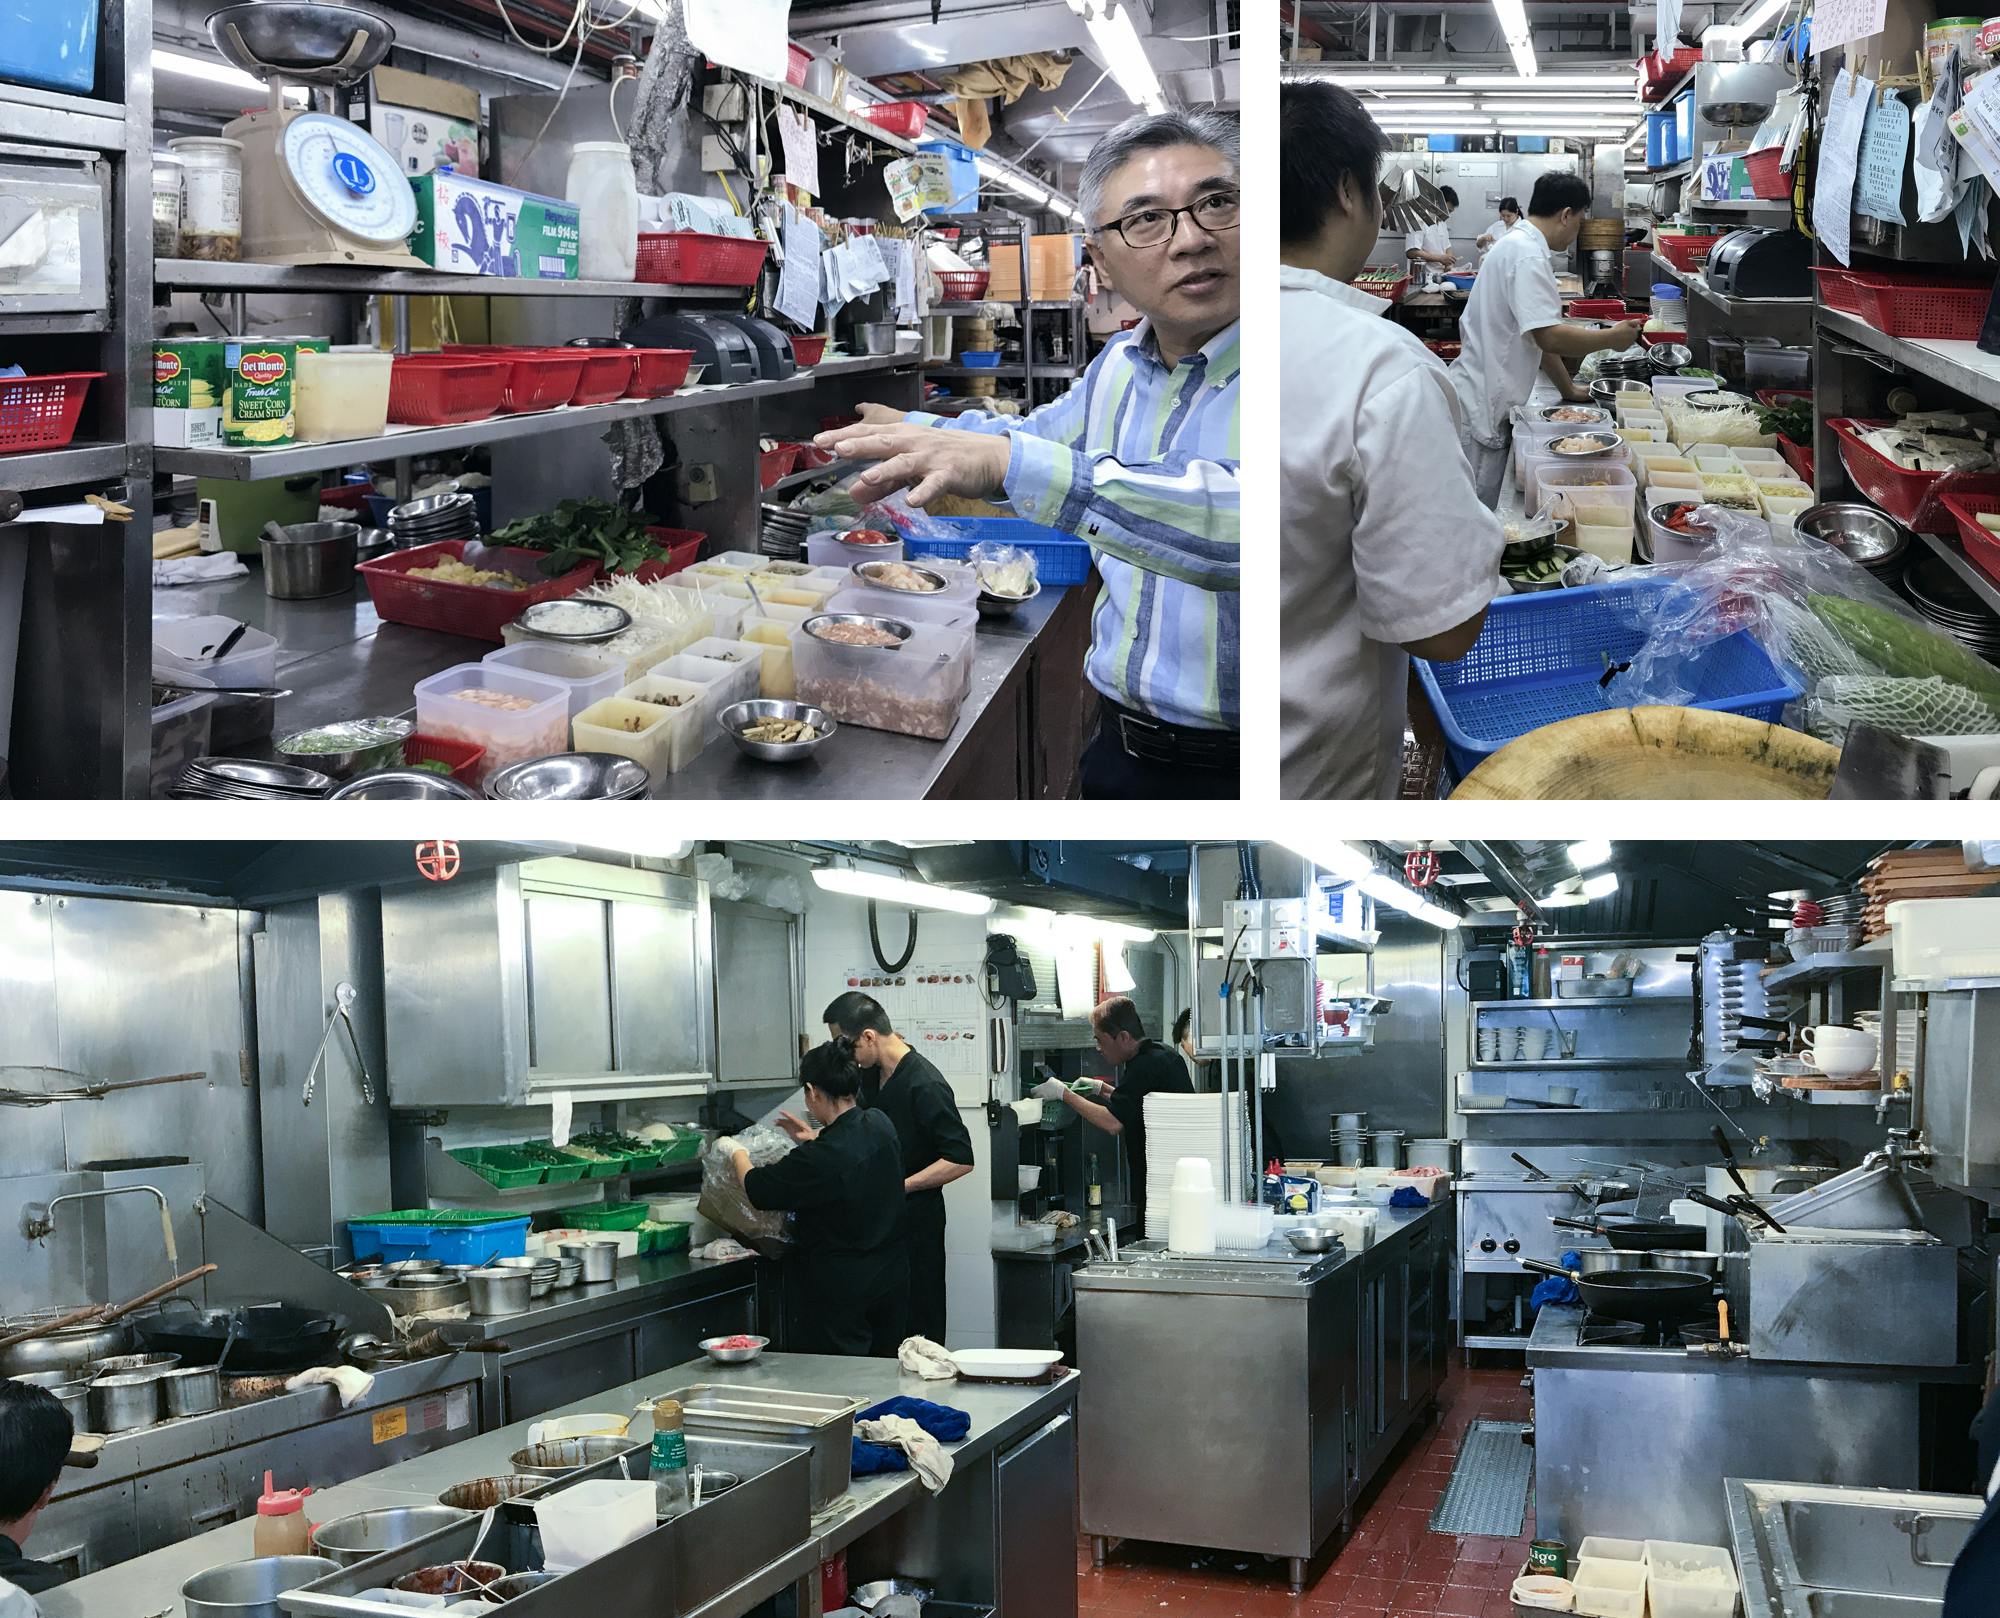 Kitchens of a few Restaurants we visited during our research. On top left hand corner, Uncle is explaining how the kitche operates; on the top right corner and at the bottom, two different kitchen setups.